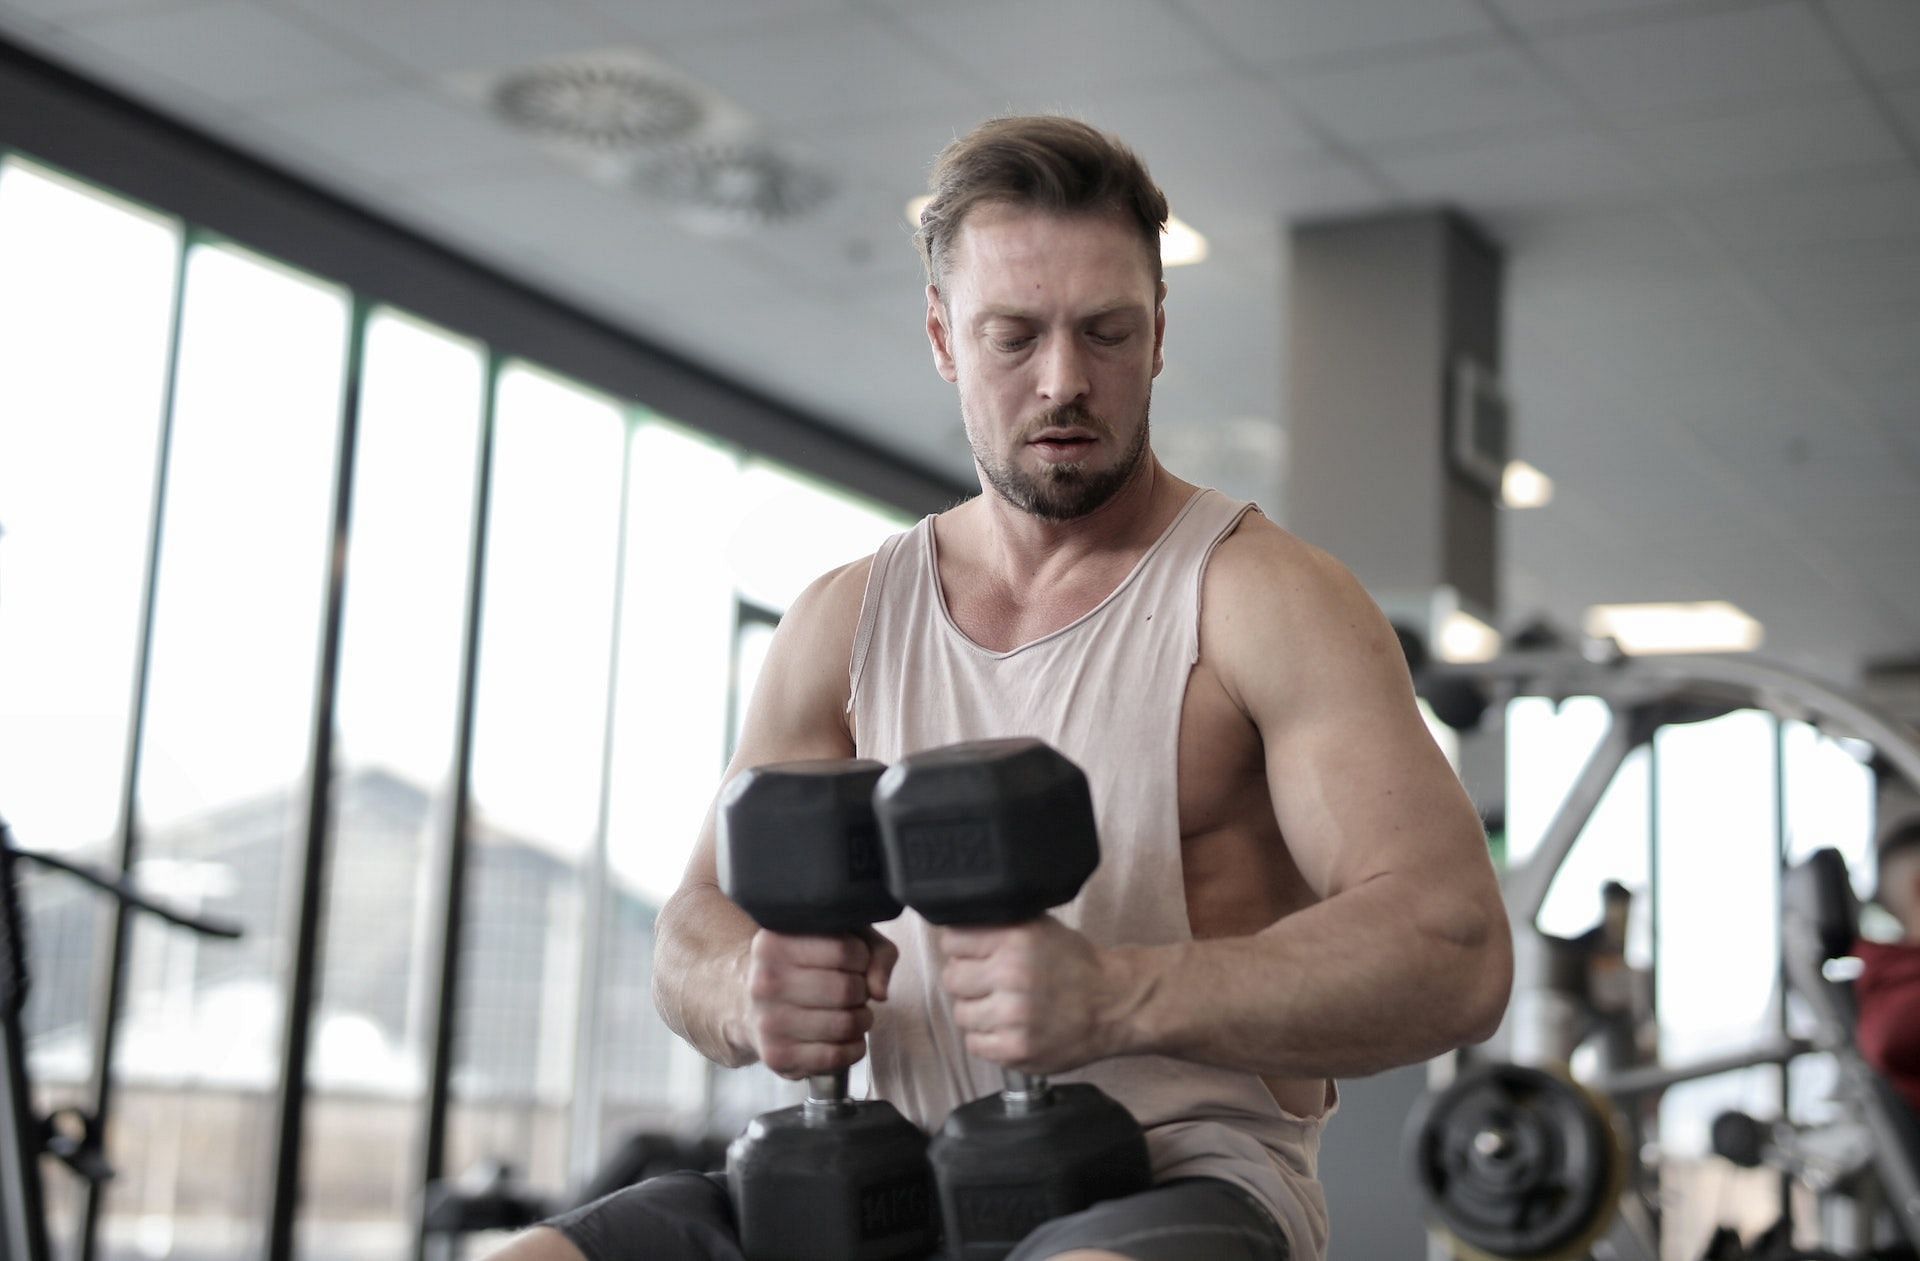 Dumbbell shoulder press: How to do this upper body exercise correctly?